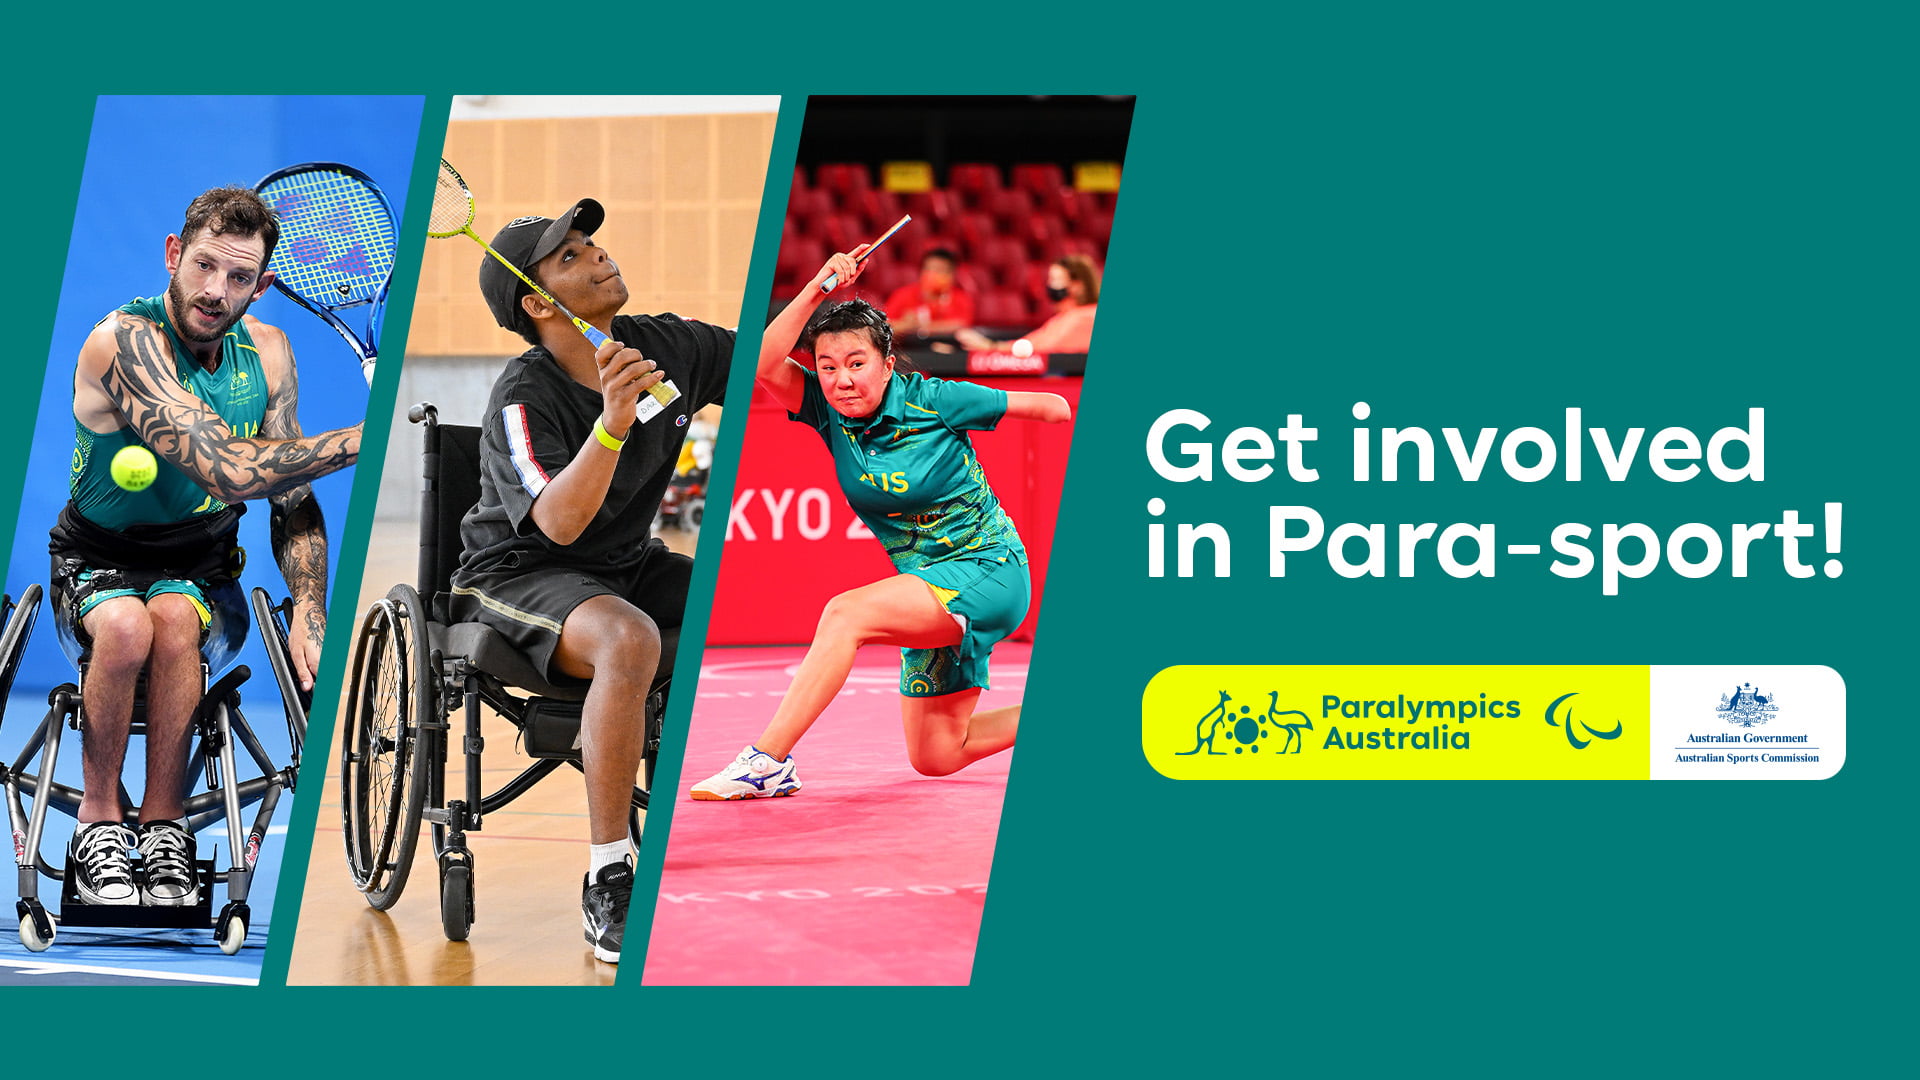 A light green background with three images on the left. The images from left to right: Australian Paralympian Heath Davidson playing Wheelchair tennis, a boy playing Para-badminton, Australian Paralympian Qiang Yang playing Para-table tennis. Text on the right of the image reads: Get involved in Para-sport! A white button with green text reads: register today! In the bottom right corner is the Paralympics Australia and Australian Sports Commission logos.